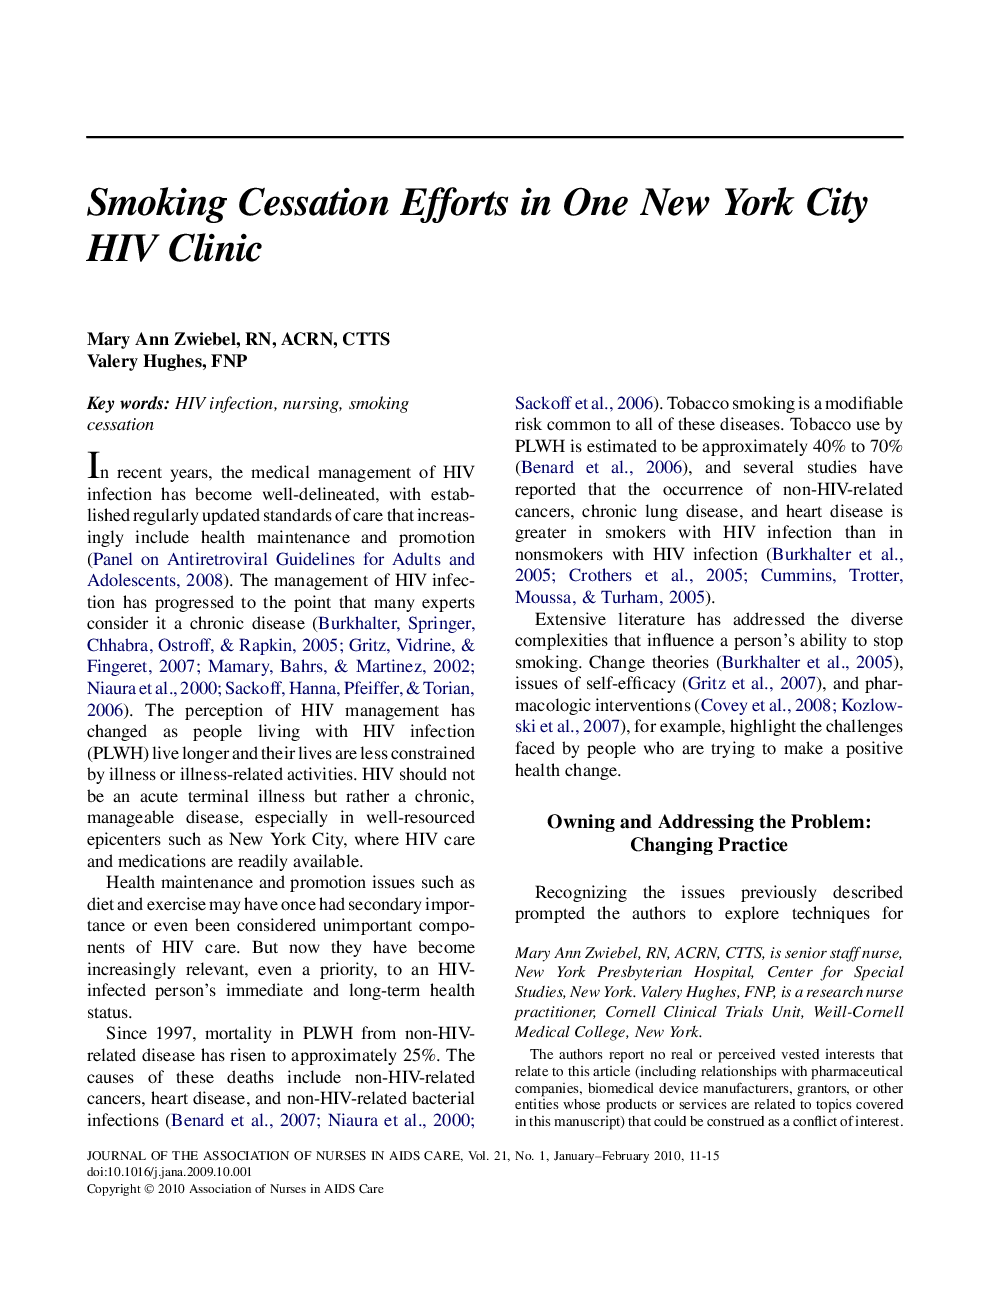 Smoking Cessation Efforts in One New York City HIV Clinic